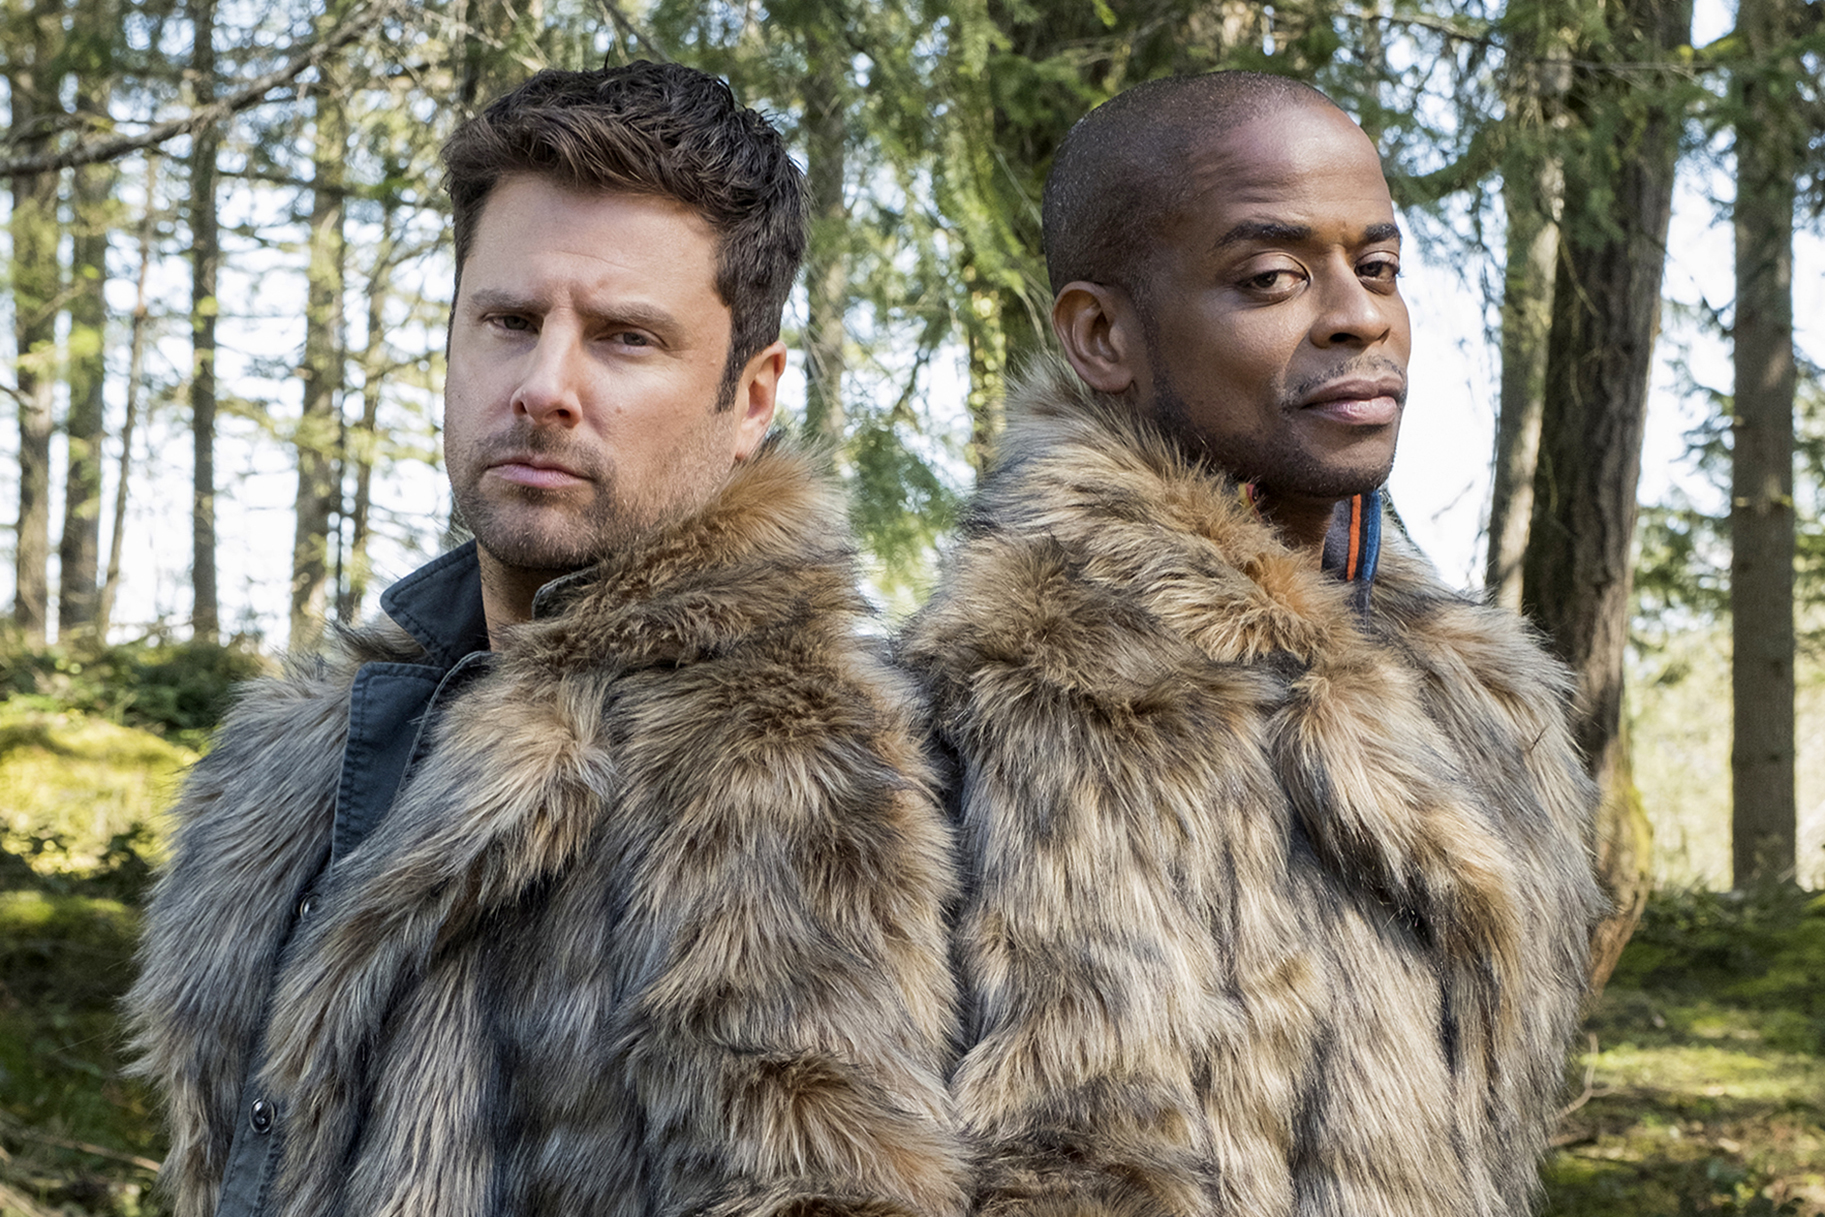 James Roday as Shawn Spencer, Dule Hill as Gus Guster